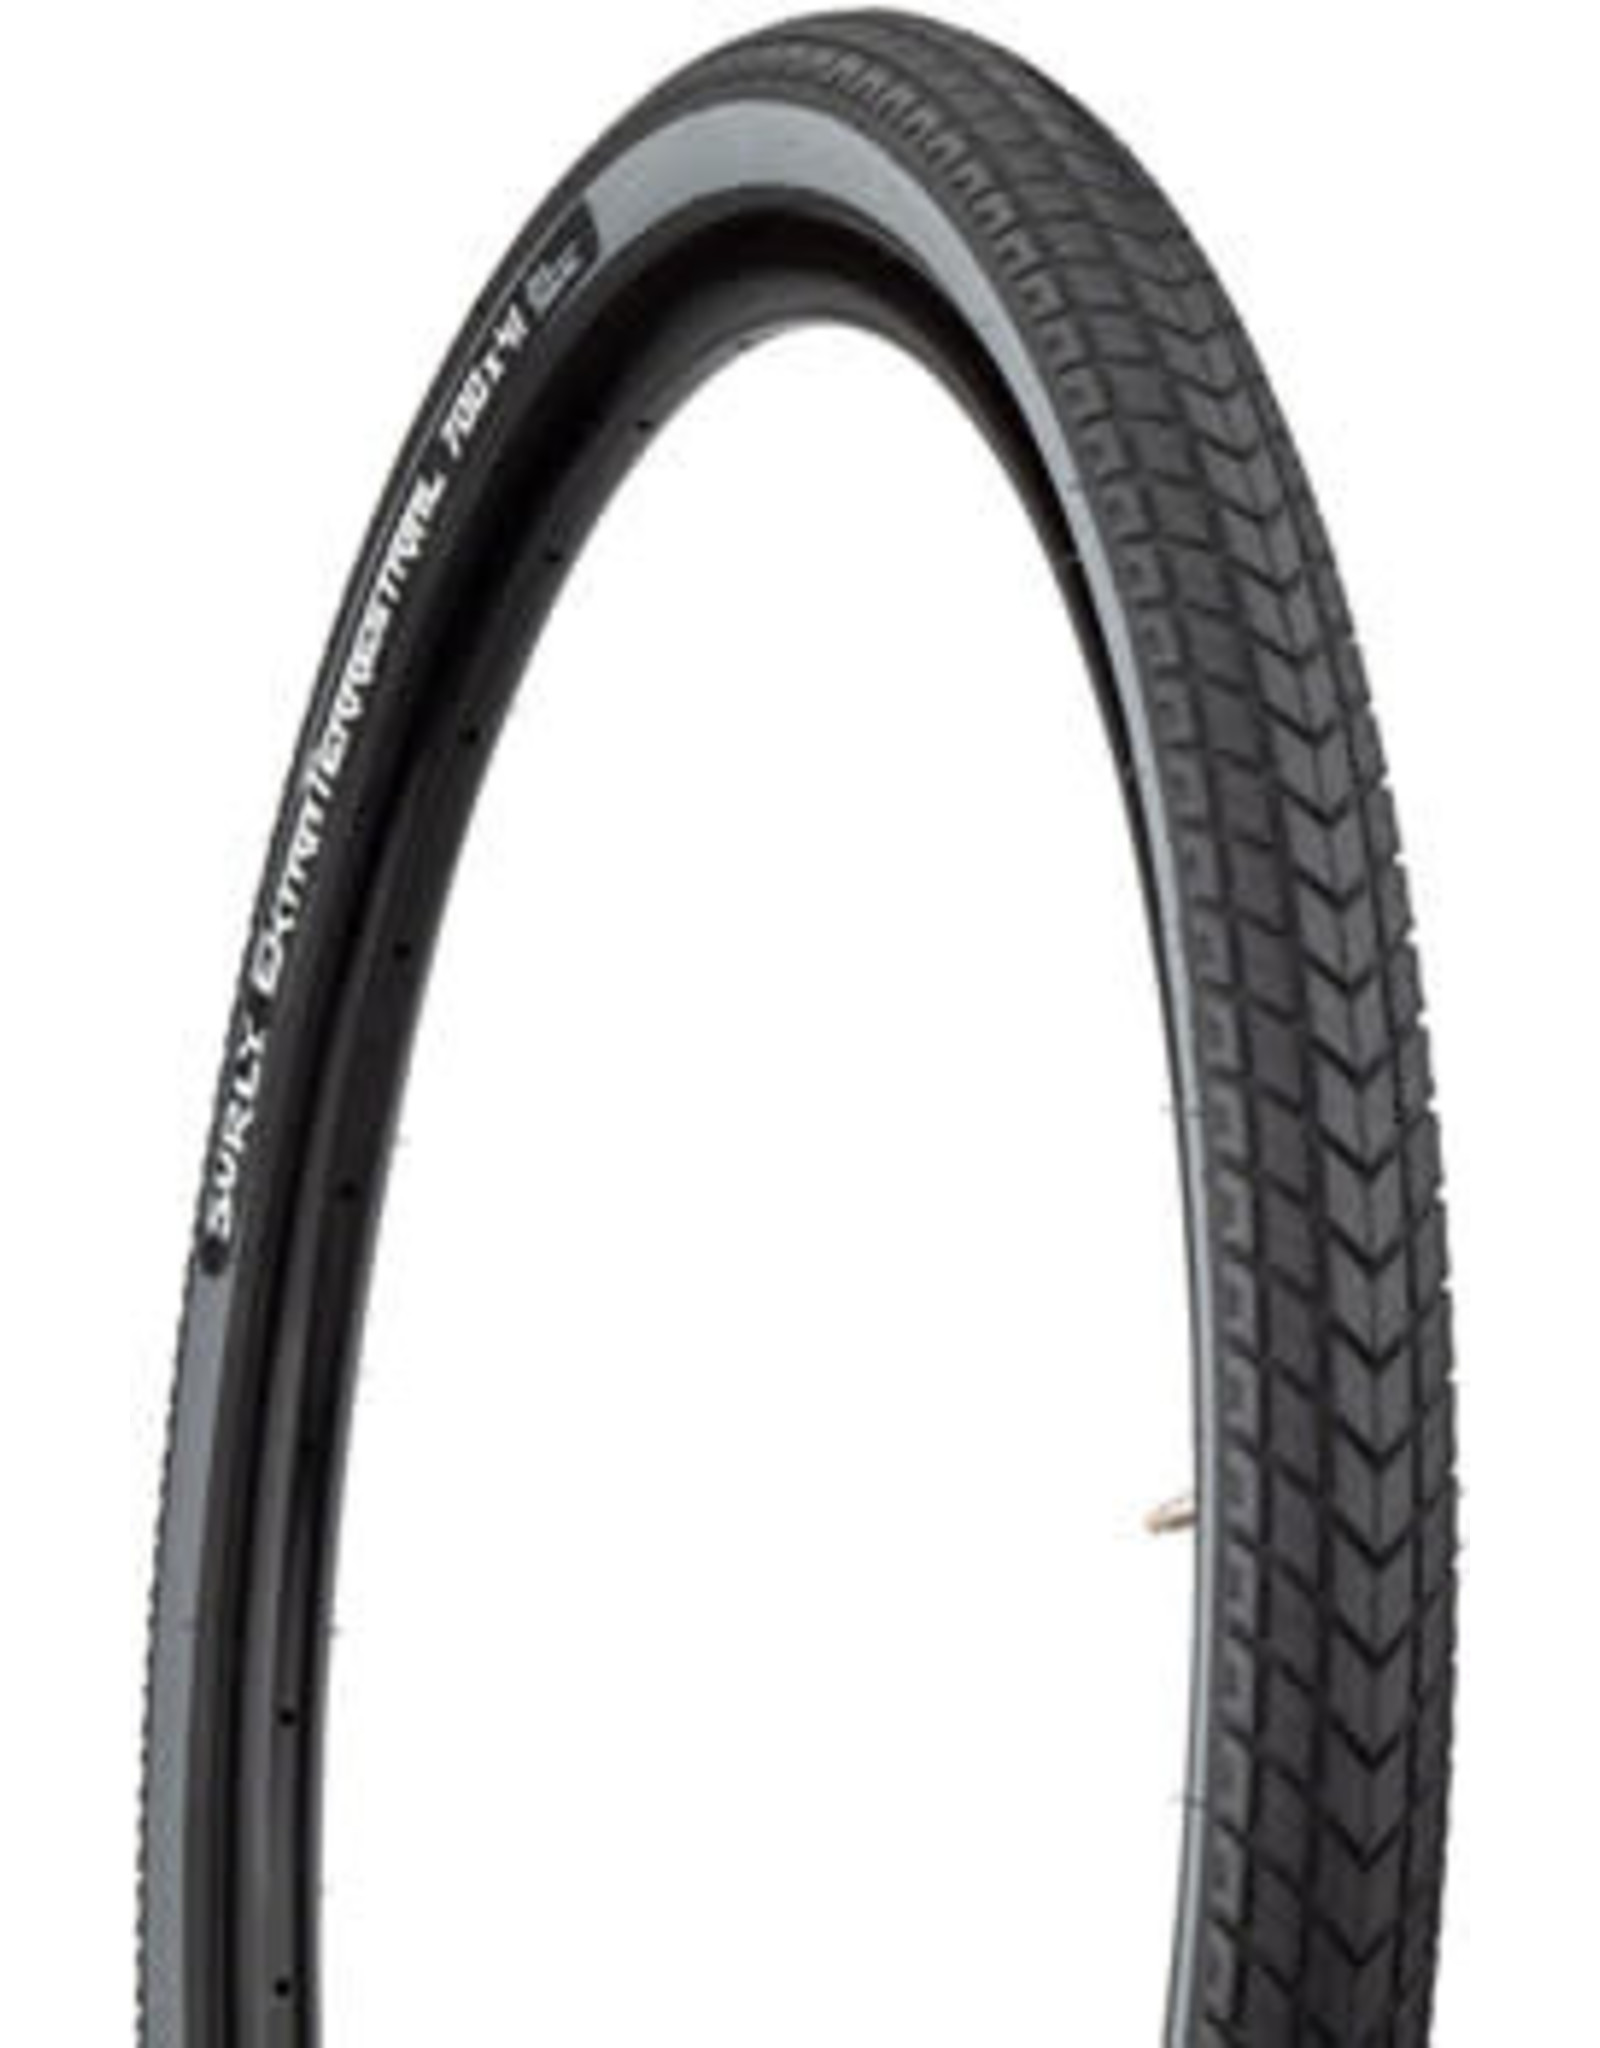 Surly Surly ExtraTerrestrial Tire - Tubeless, Folding, 60tpi